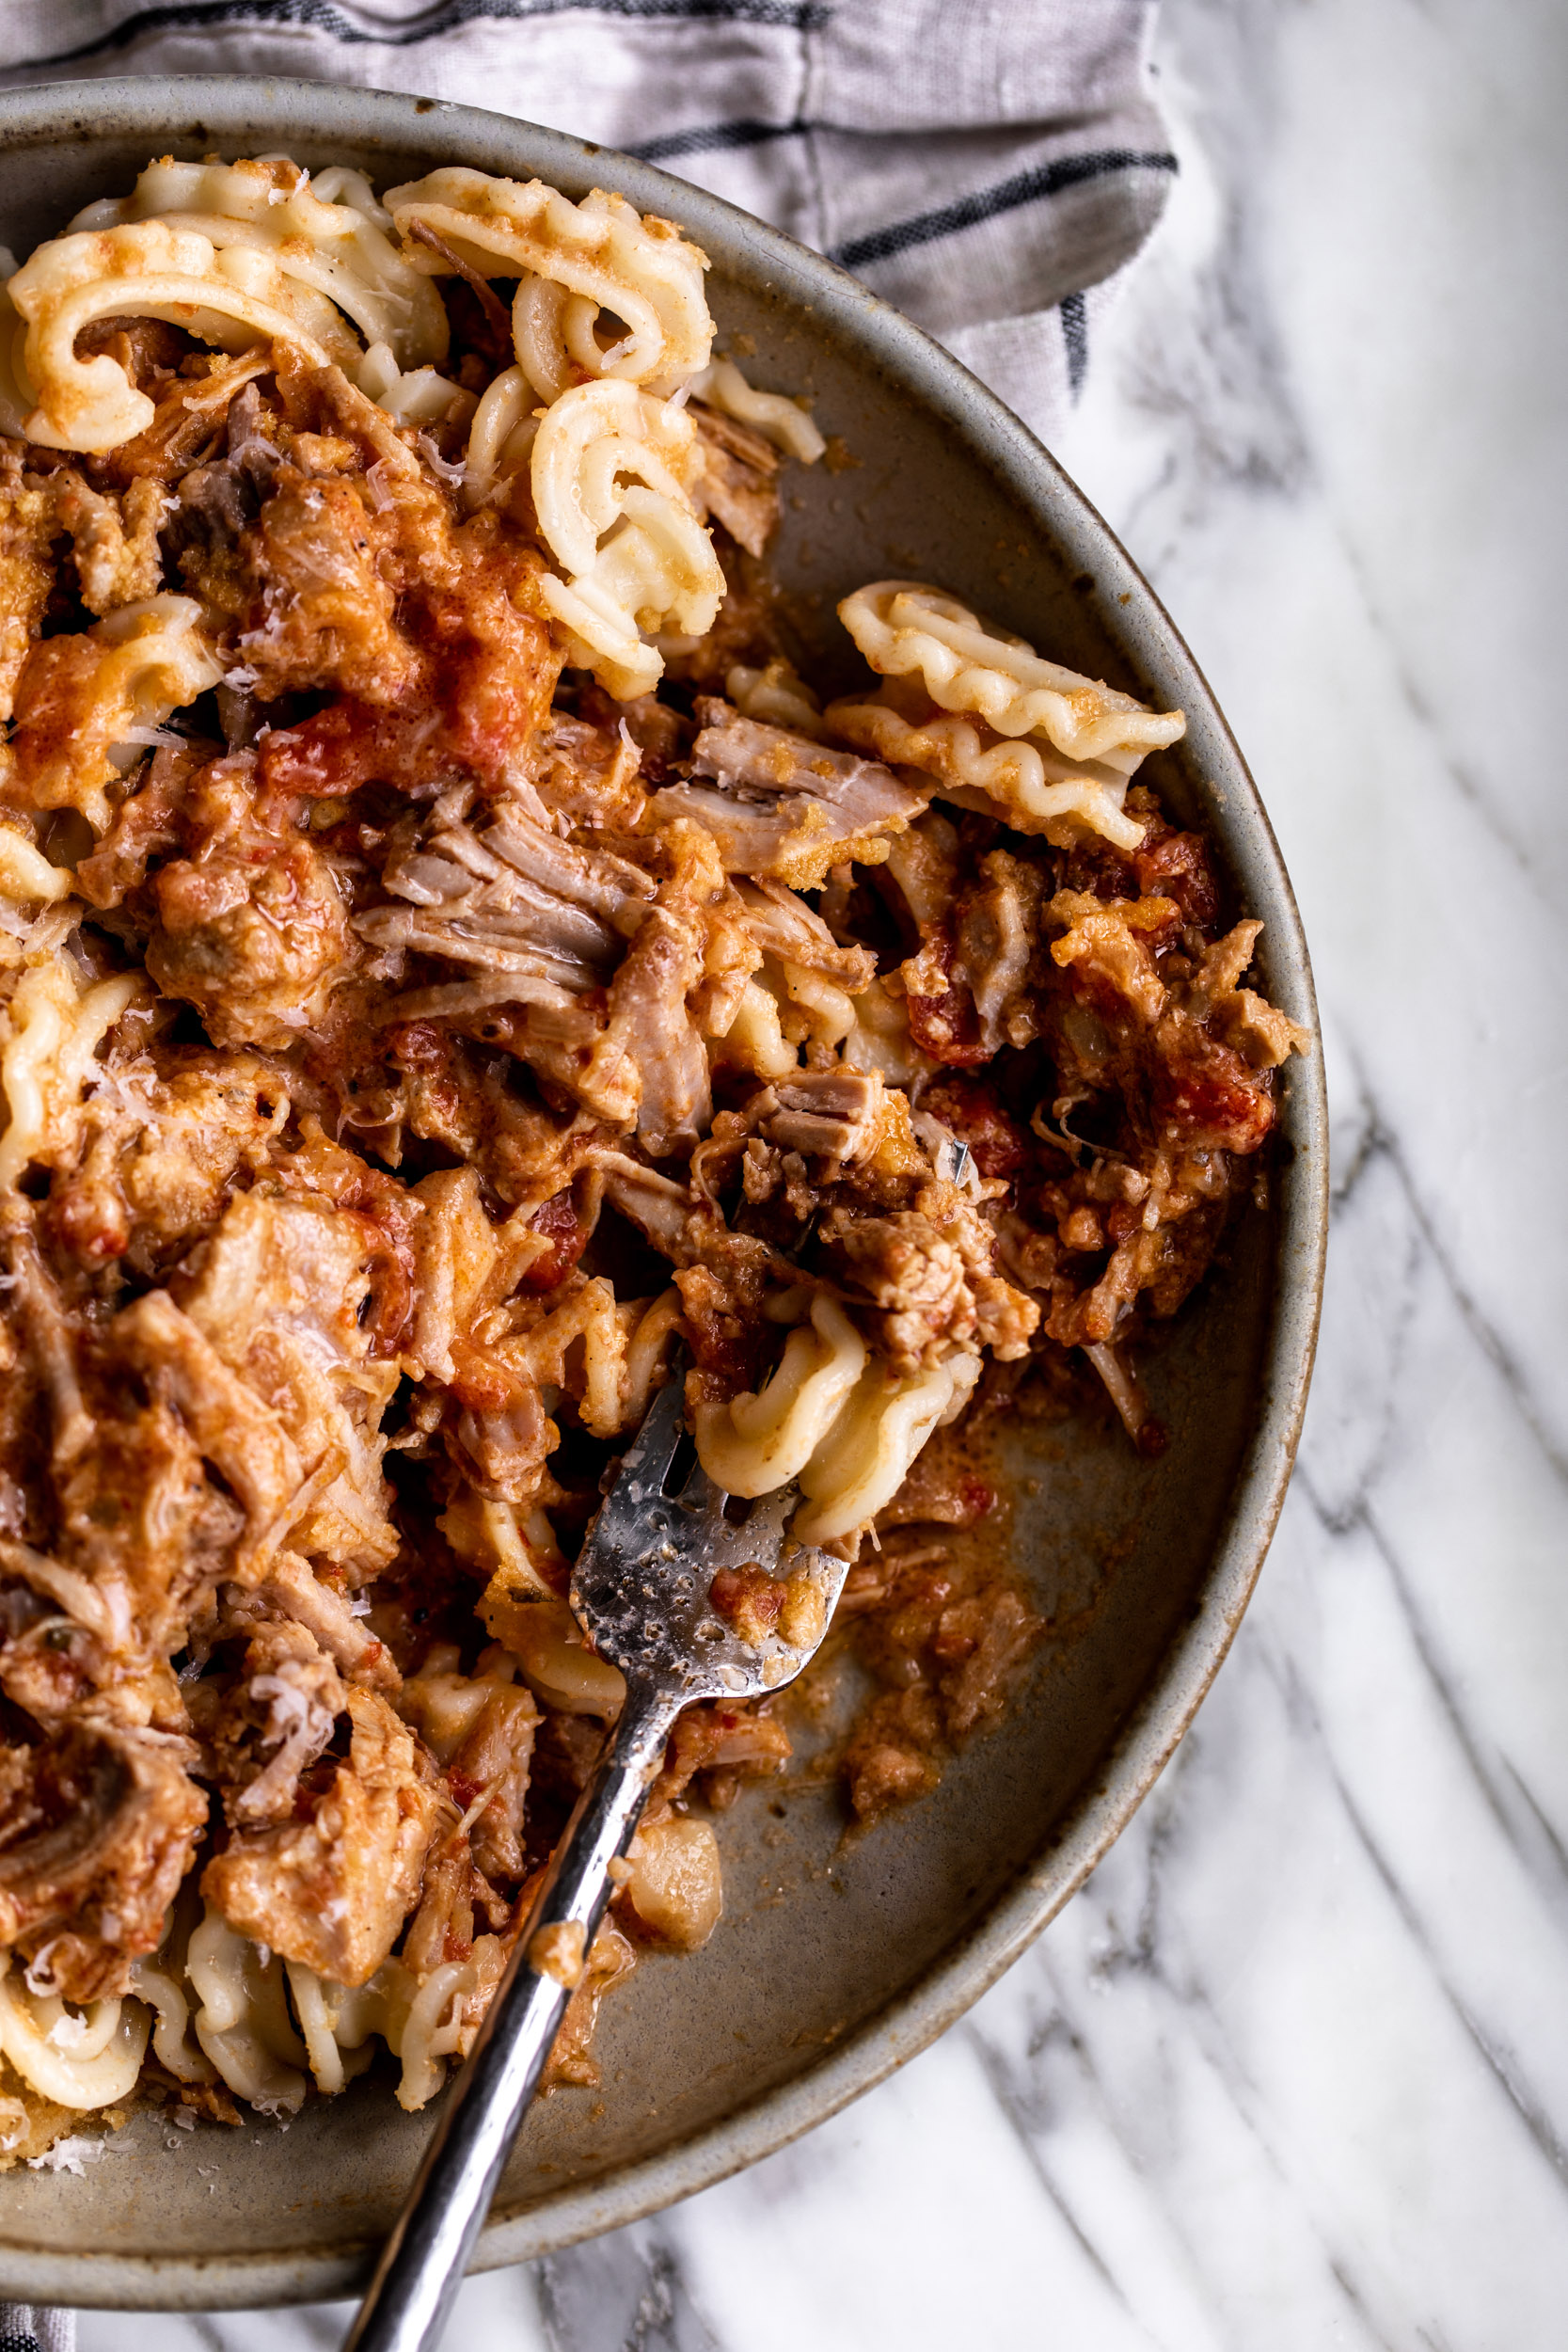 Kylie’s Creamy Spicy Pork Sugo with Buttered Breadcrumbs